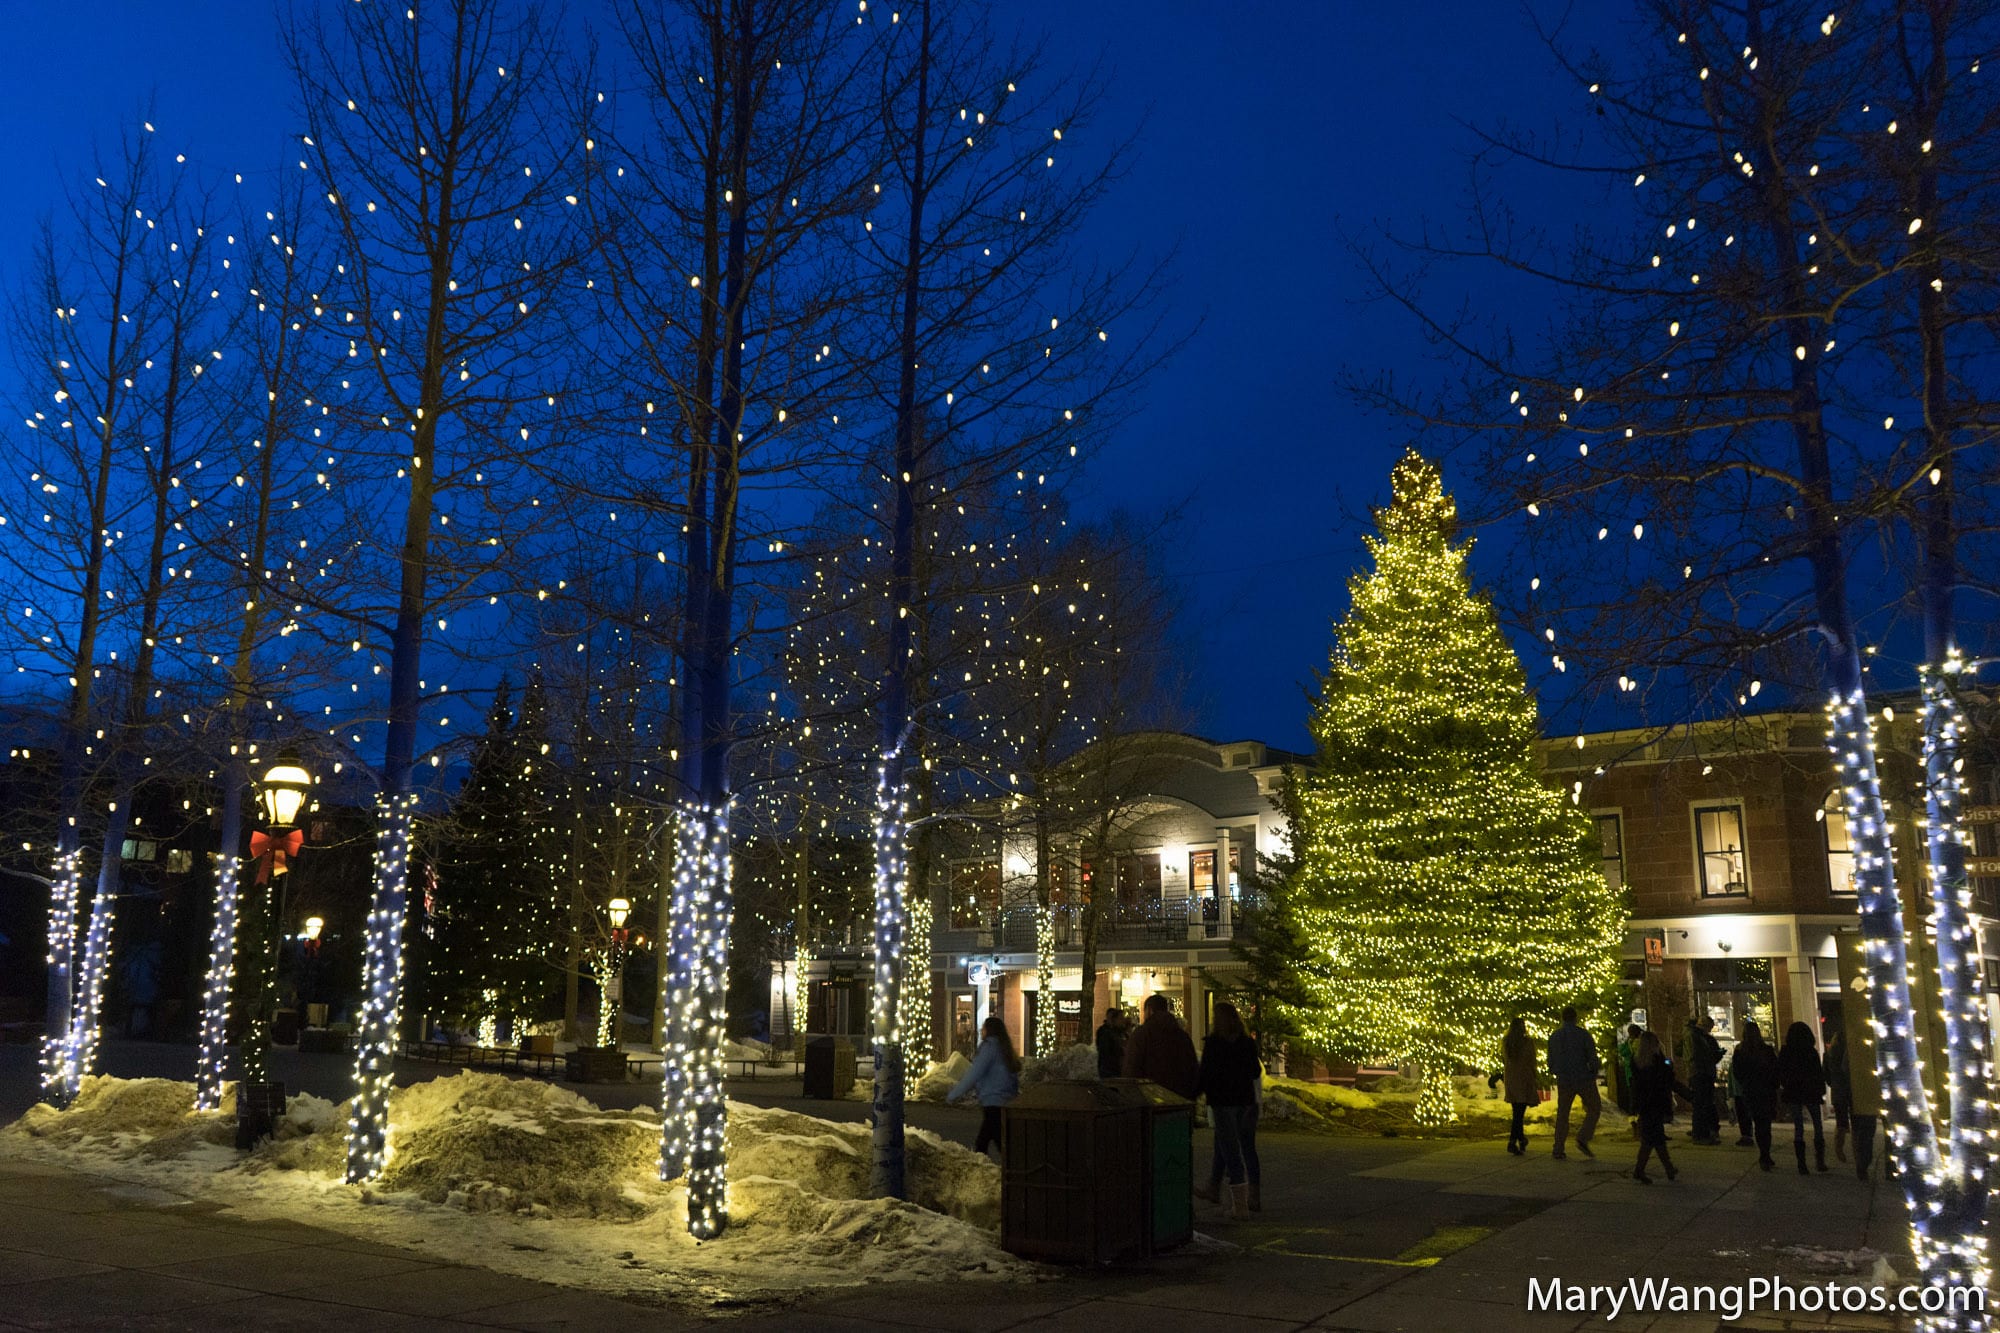 image of holiday lights in breckenridge